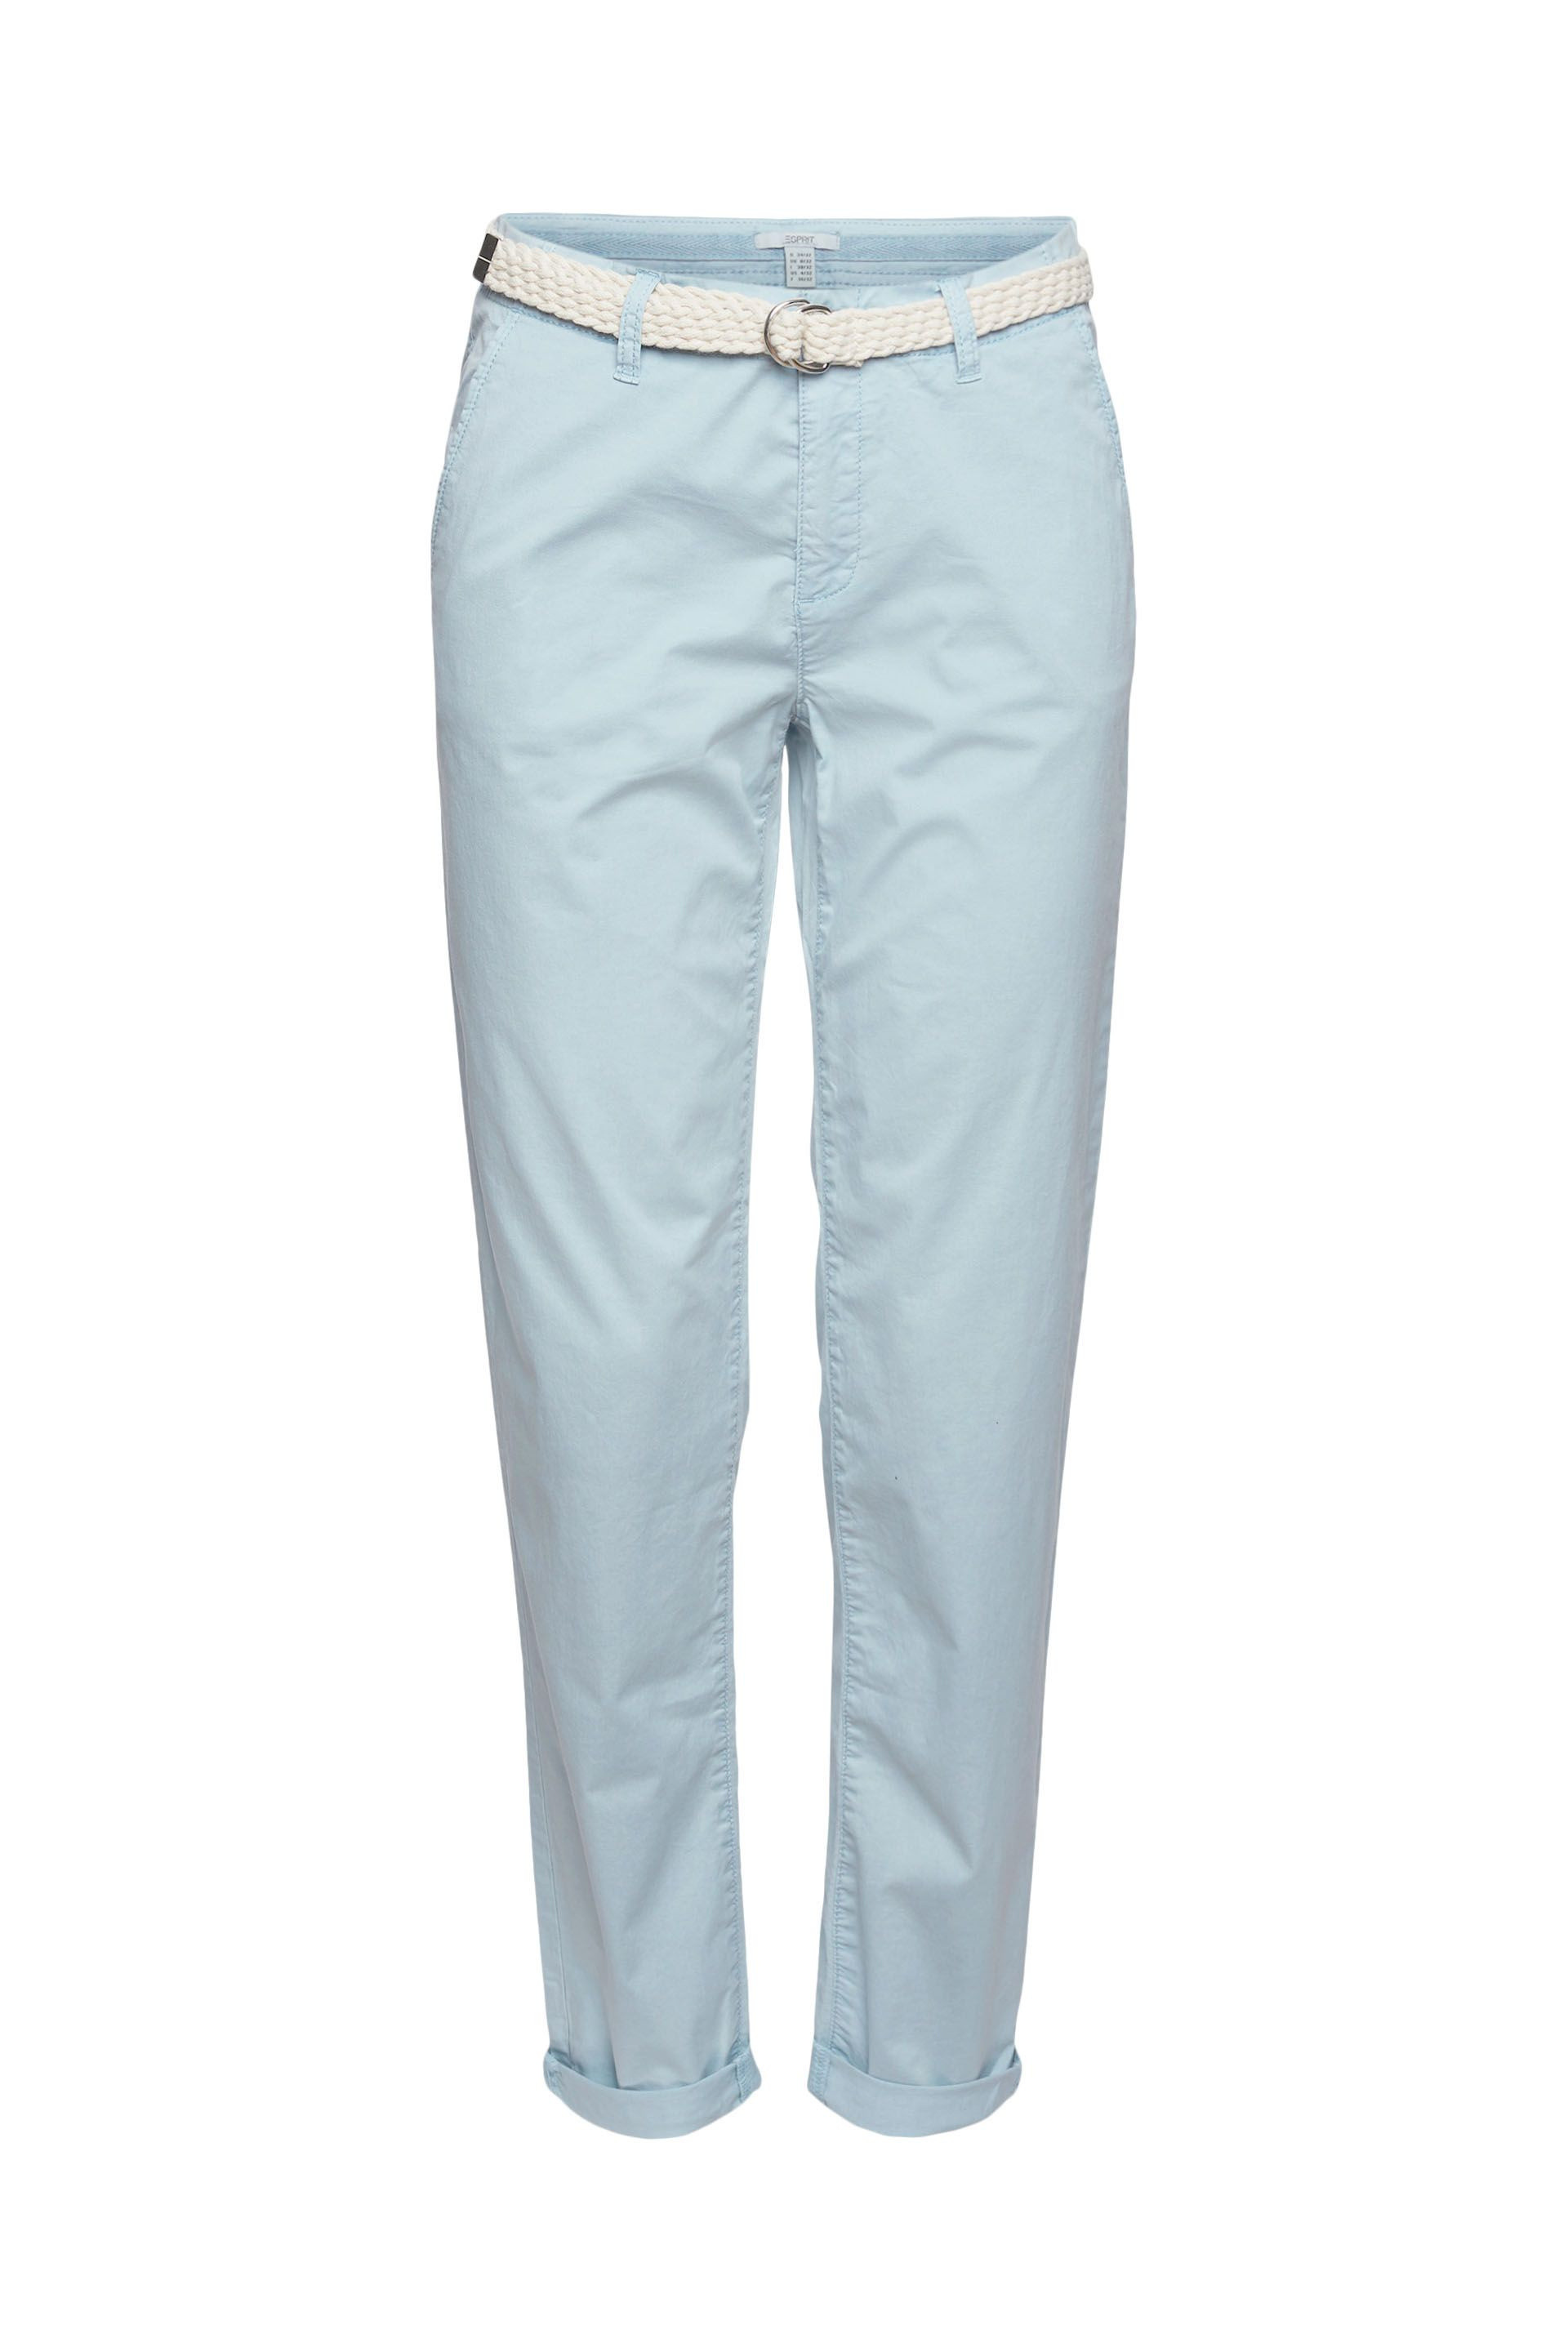 Chino trousers with woven belt, Blue Celeste, large image number 0